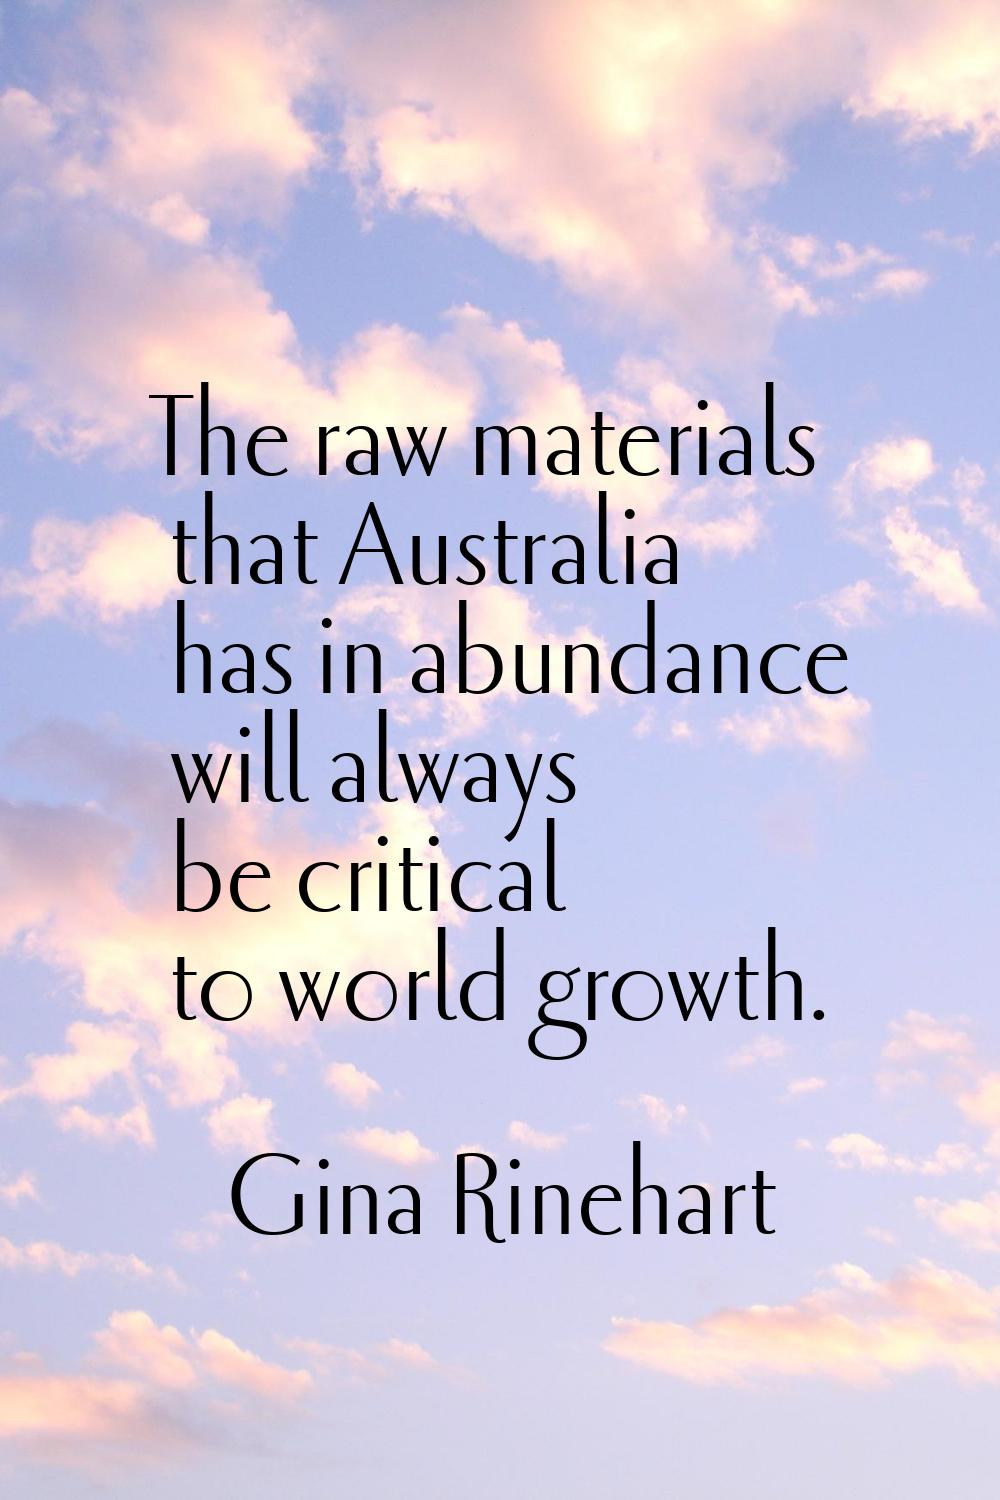 The raw materials that Australia has in abundance will always be critical to world growth.